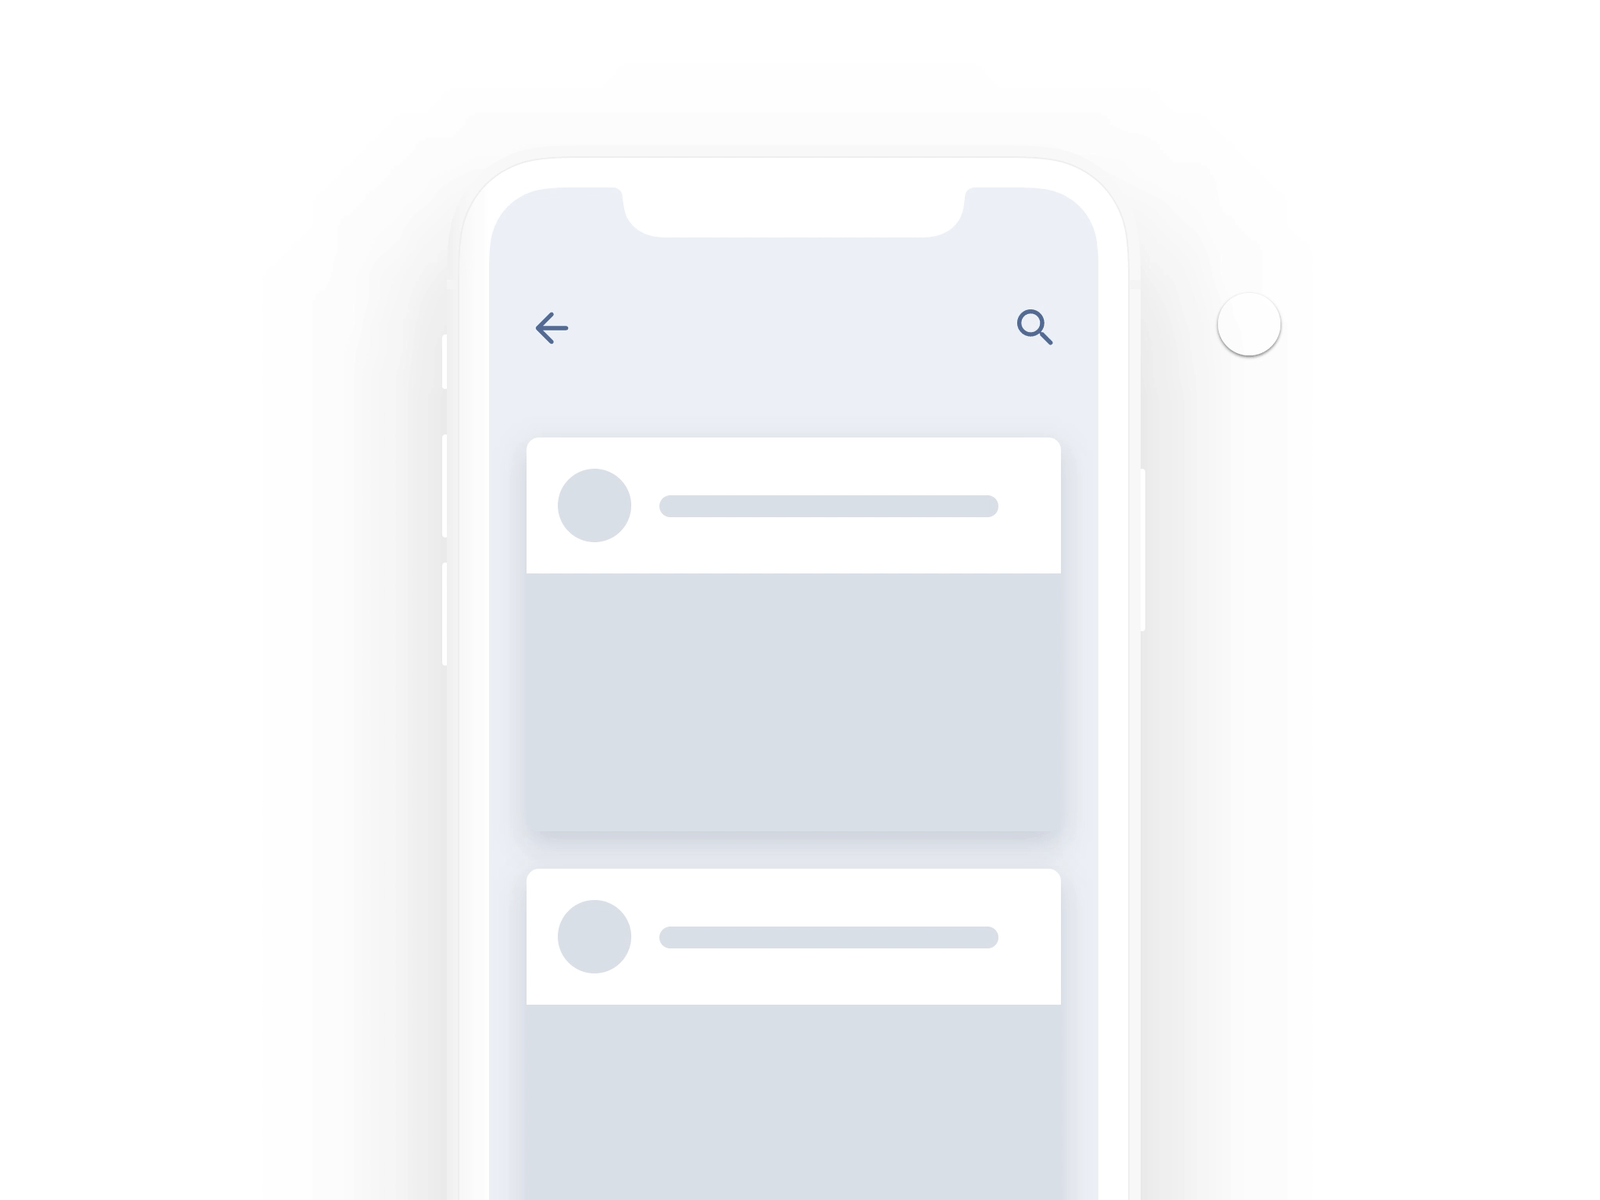 Search microinteraction animation app micro interaction mobile ui ux